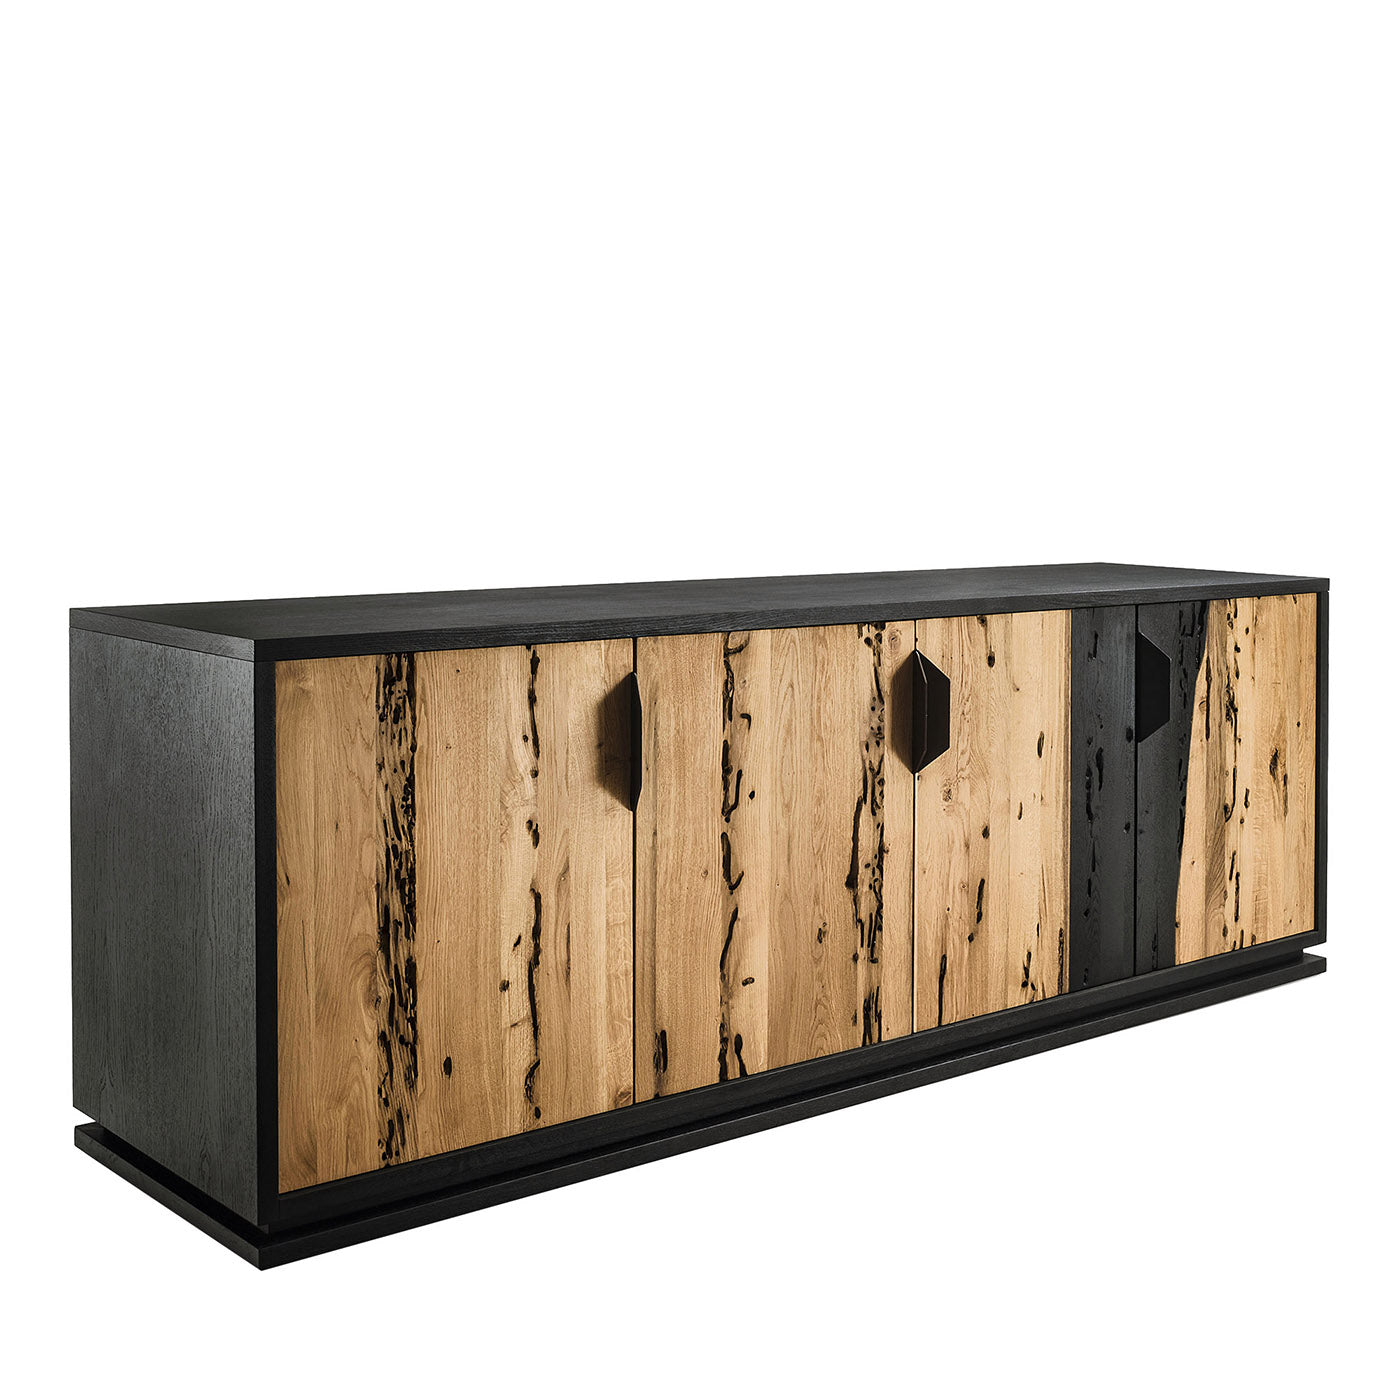 Fire Low Black Sideboard by Marco Piva - Main view